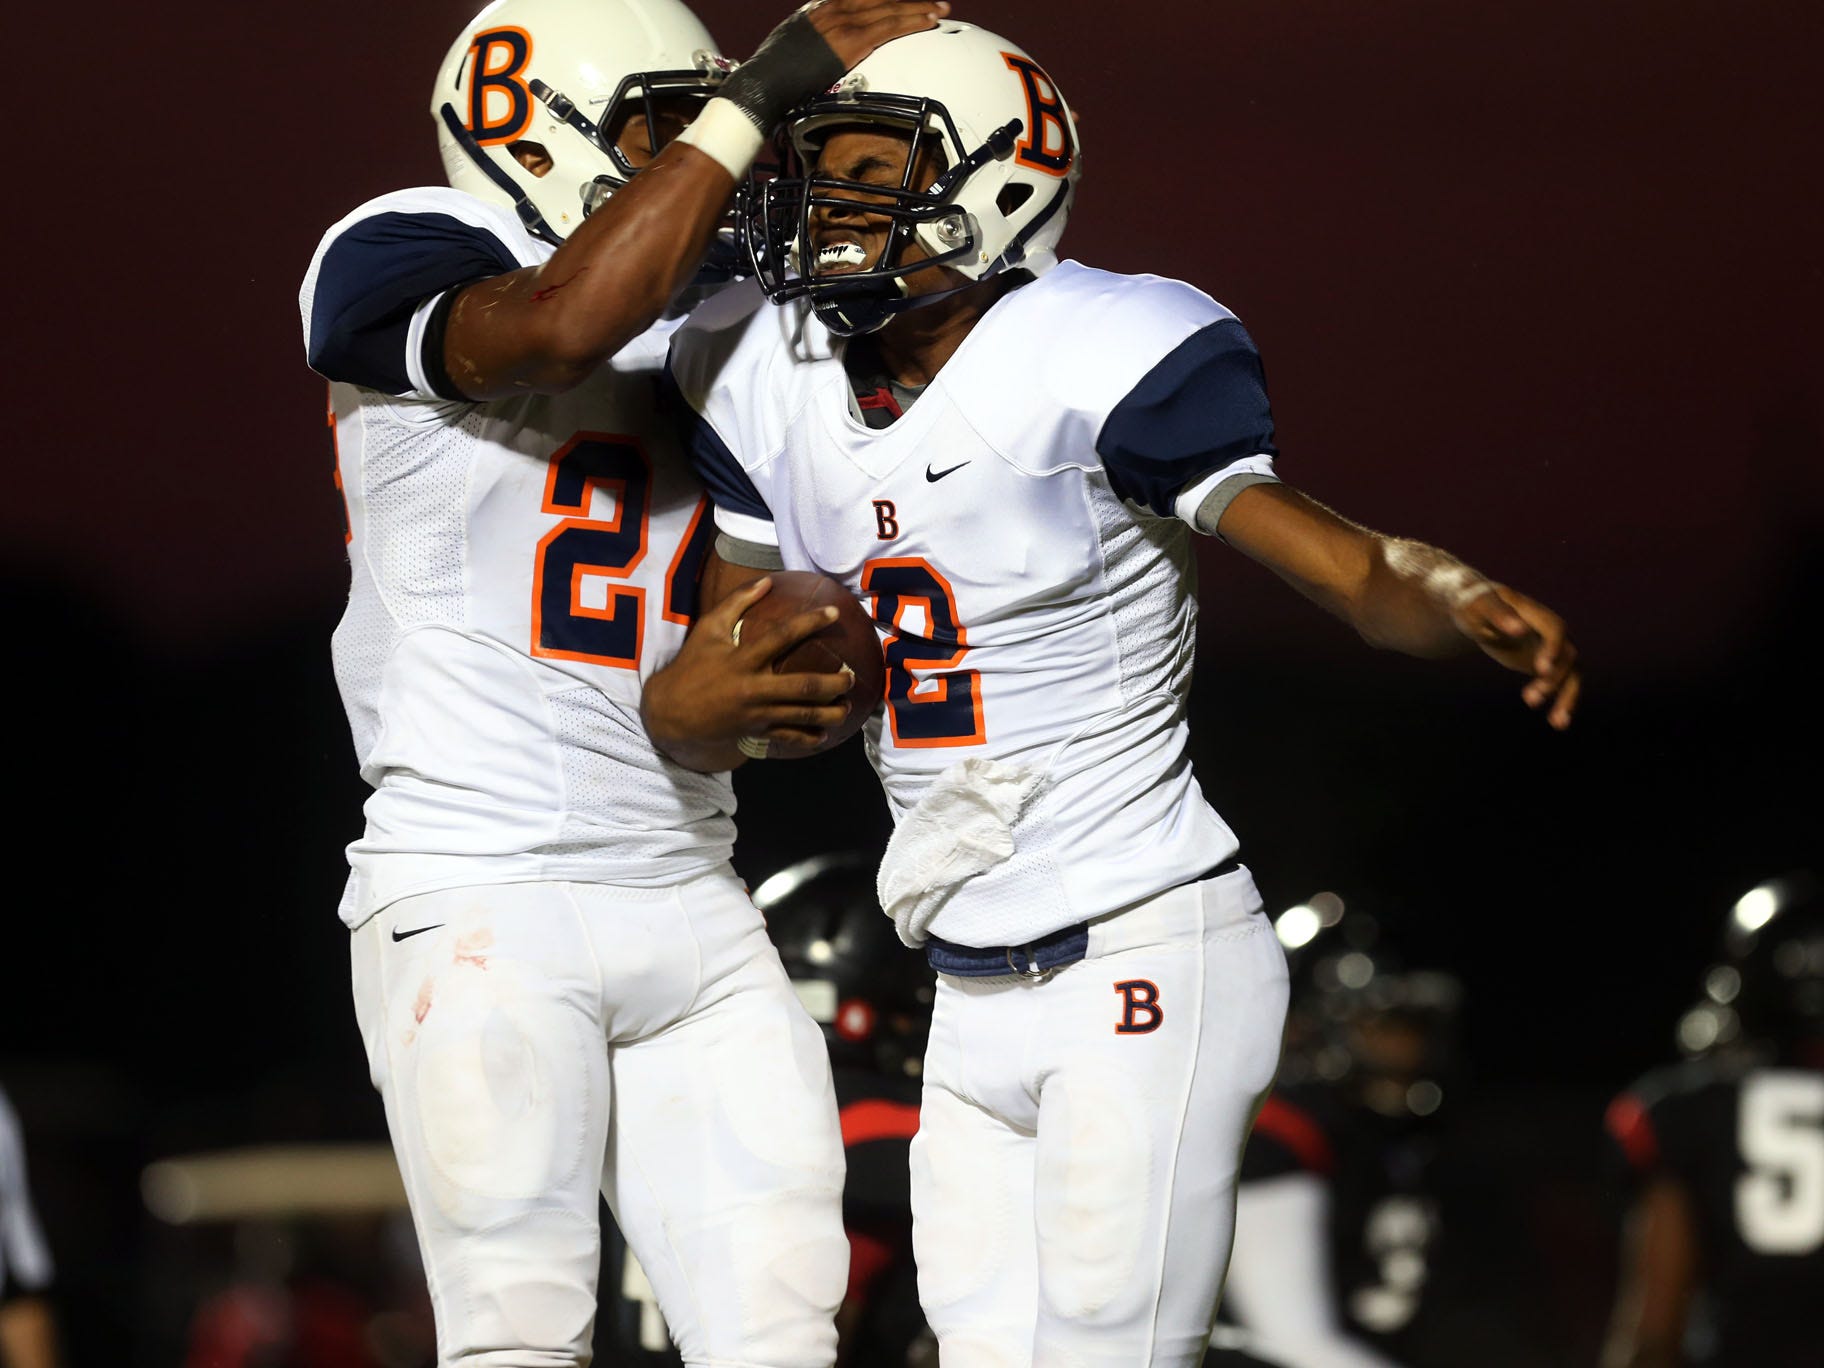 Blackman running back Charlie Davidson, left, and quarterback Jauan Jennings have had plenty to celebrate this season. The Blaze are No. 1 in The Tennessean’s Midstate Top 10.